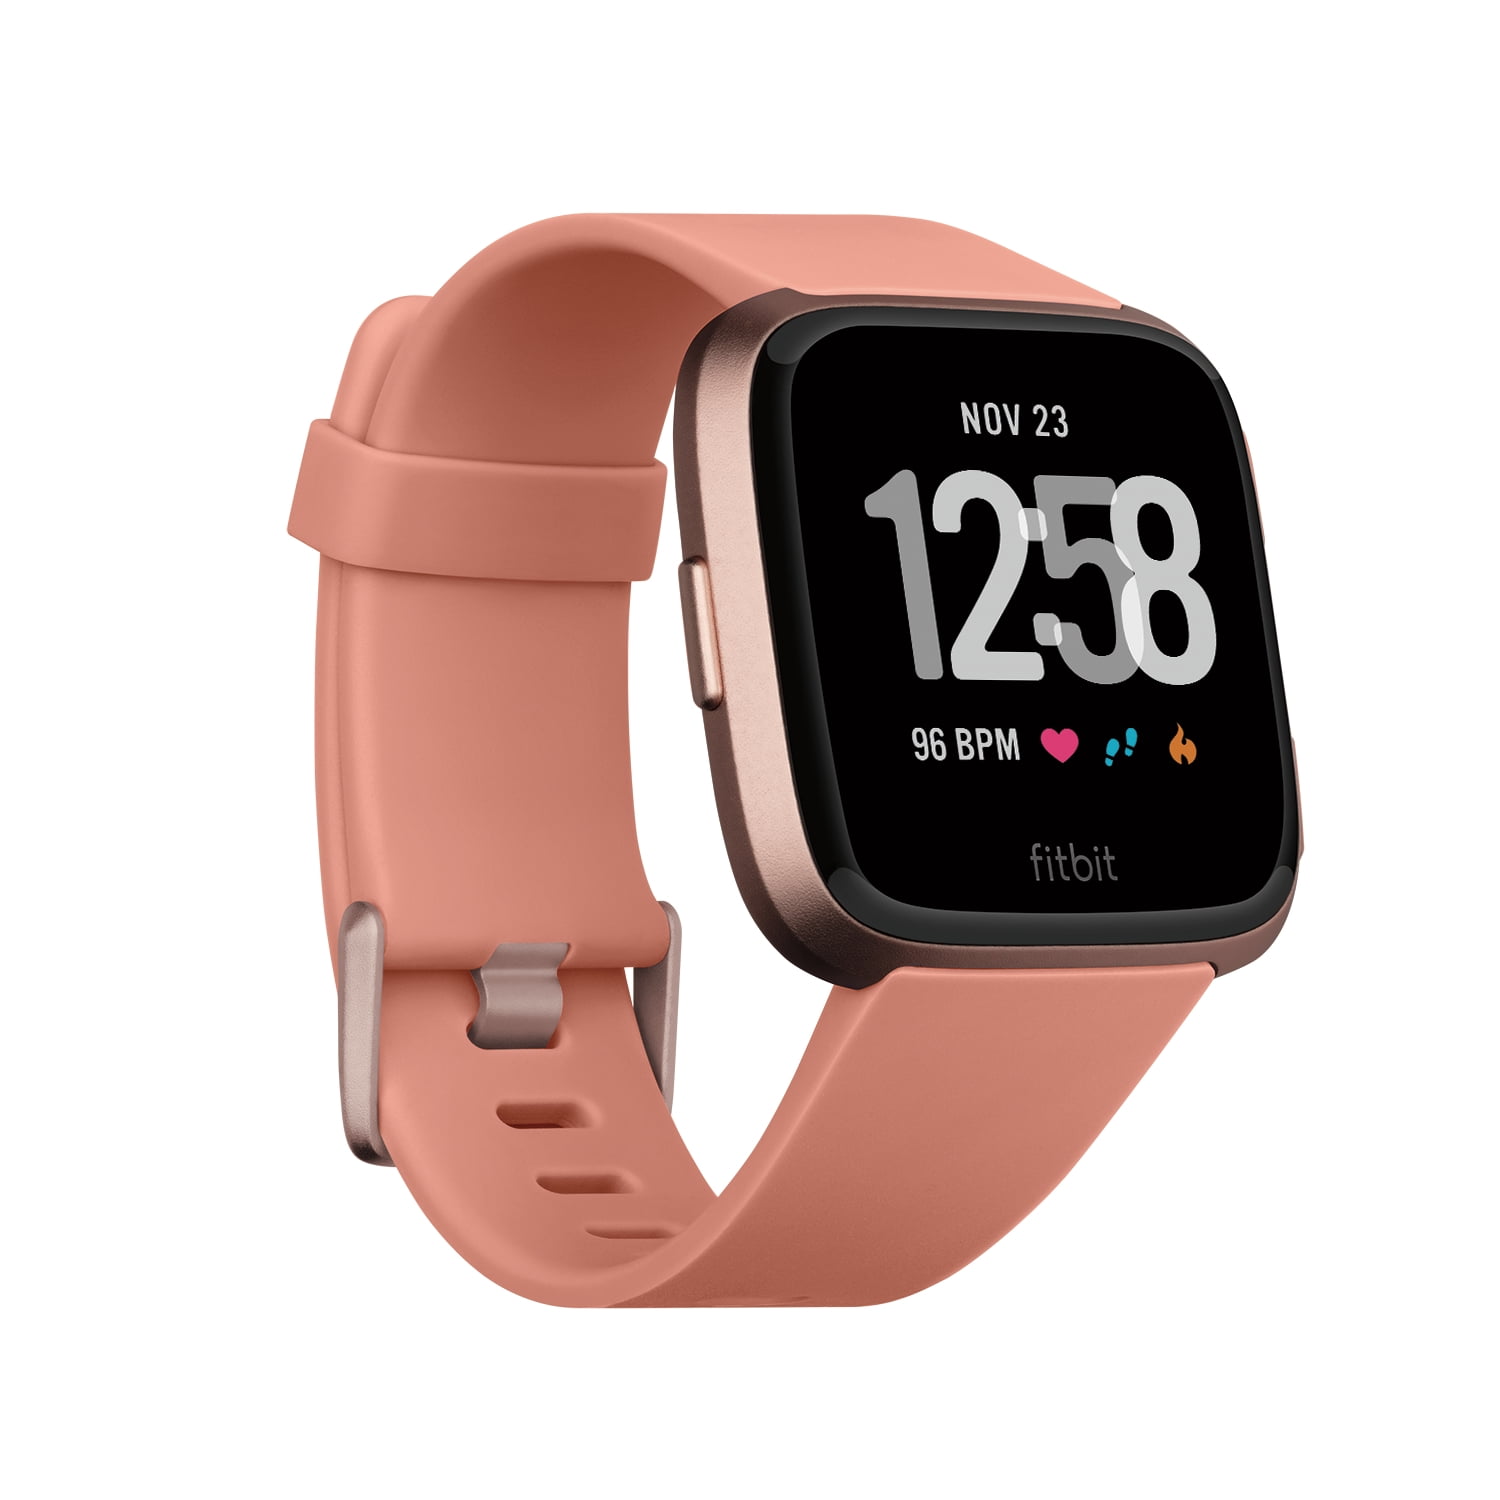 NEW Fitbit Versa SmartWatch HR Fitness Activity Tracker Gold Pink Small & Large 